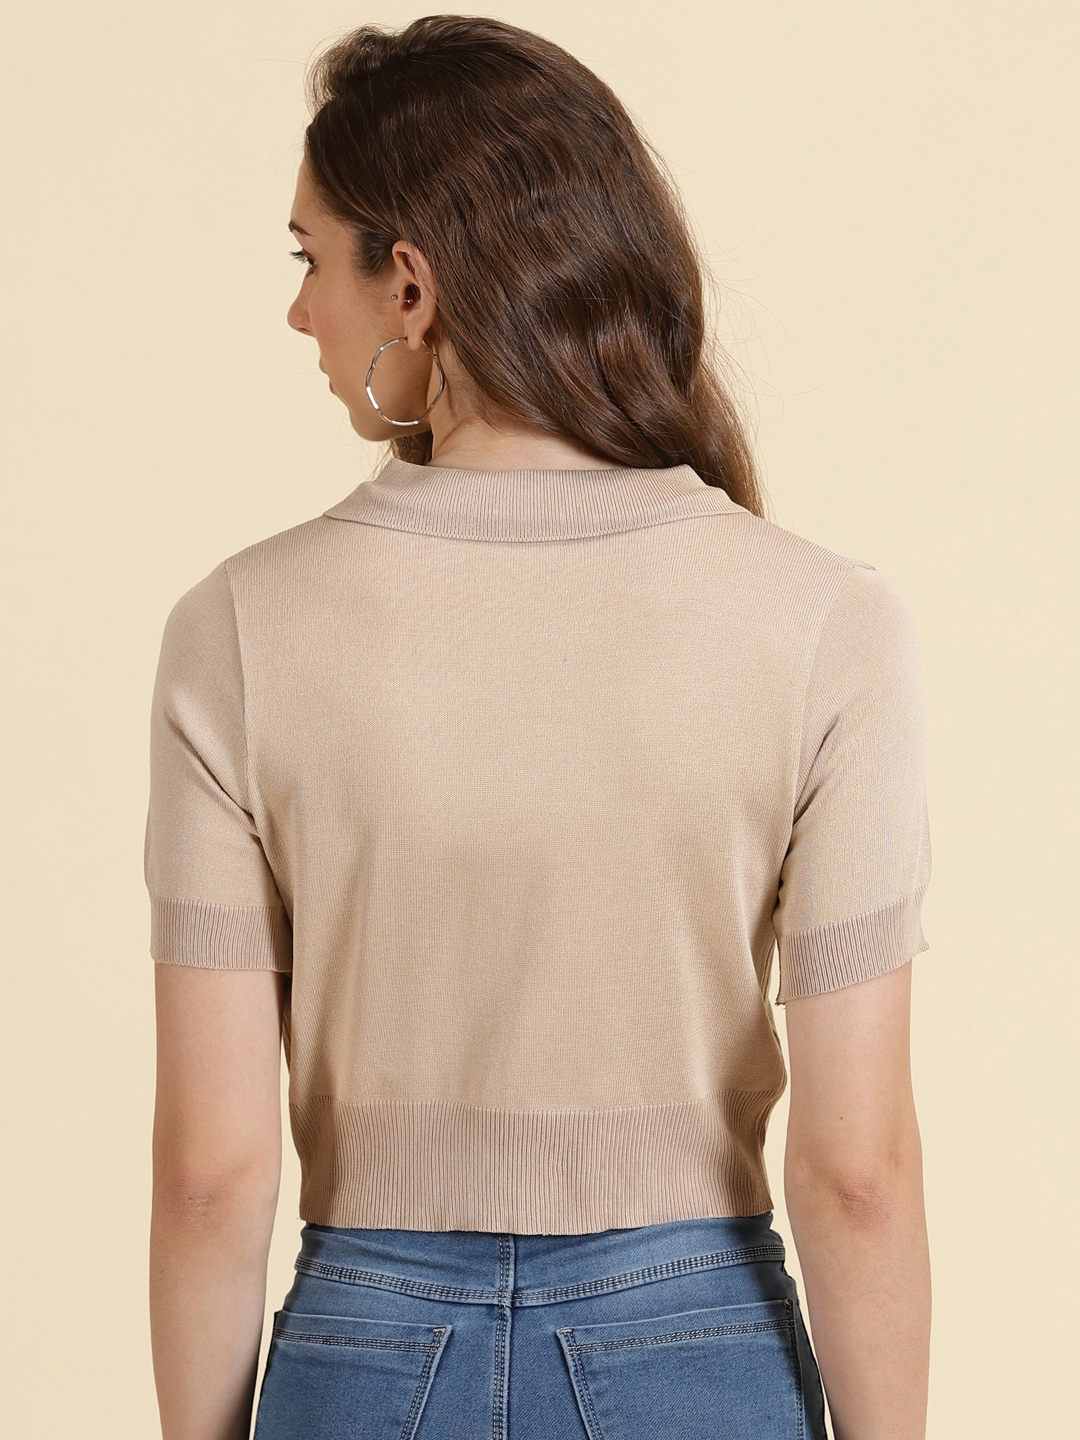 Showoff | SHOWOFF Women's Shirt Collar Solid Beige Fitted Crop Top 3